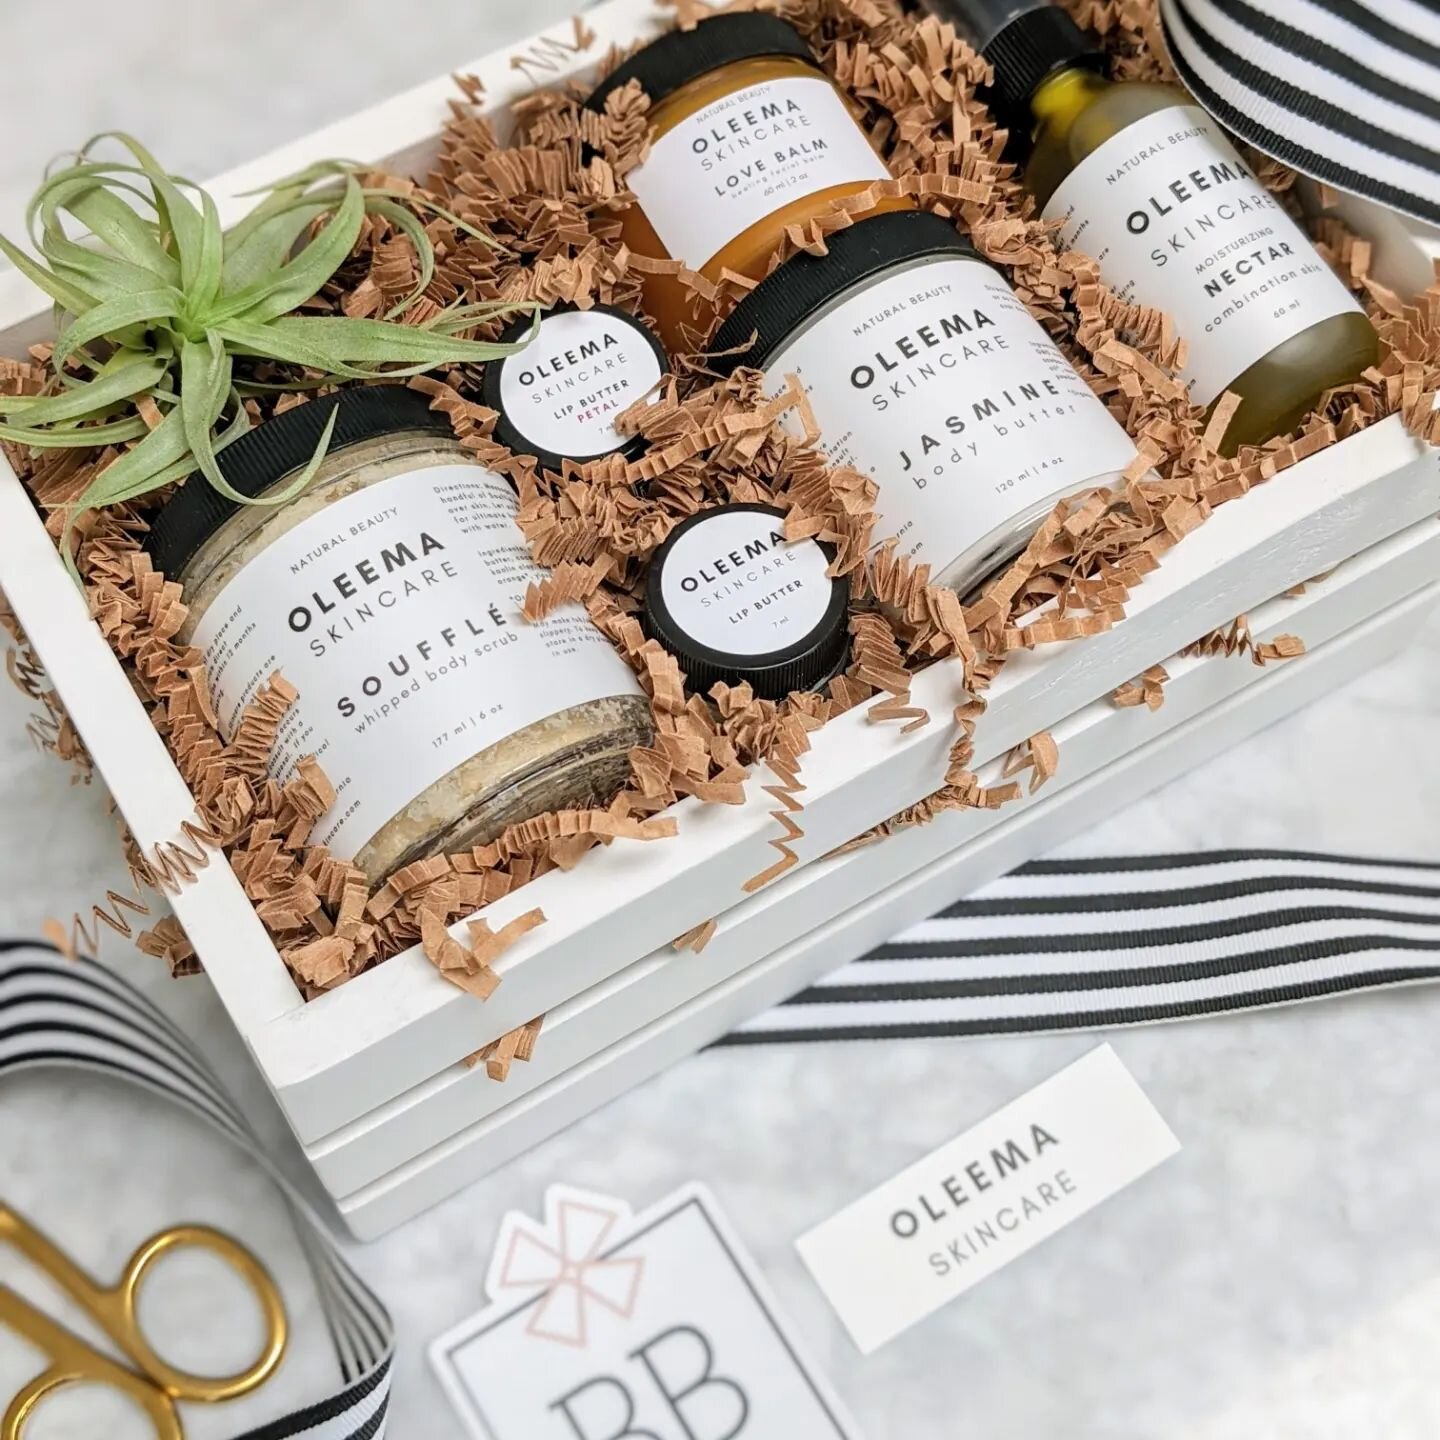 I'm so delighted to have connected with Jenny from @oleemaskincare! 

Oleema Skincare is the result of Jenny's inspiration to create a clean, simple skincare line made from all natural, botanical ingredients influenced by California living. 

These p